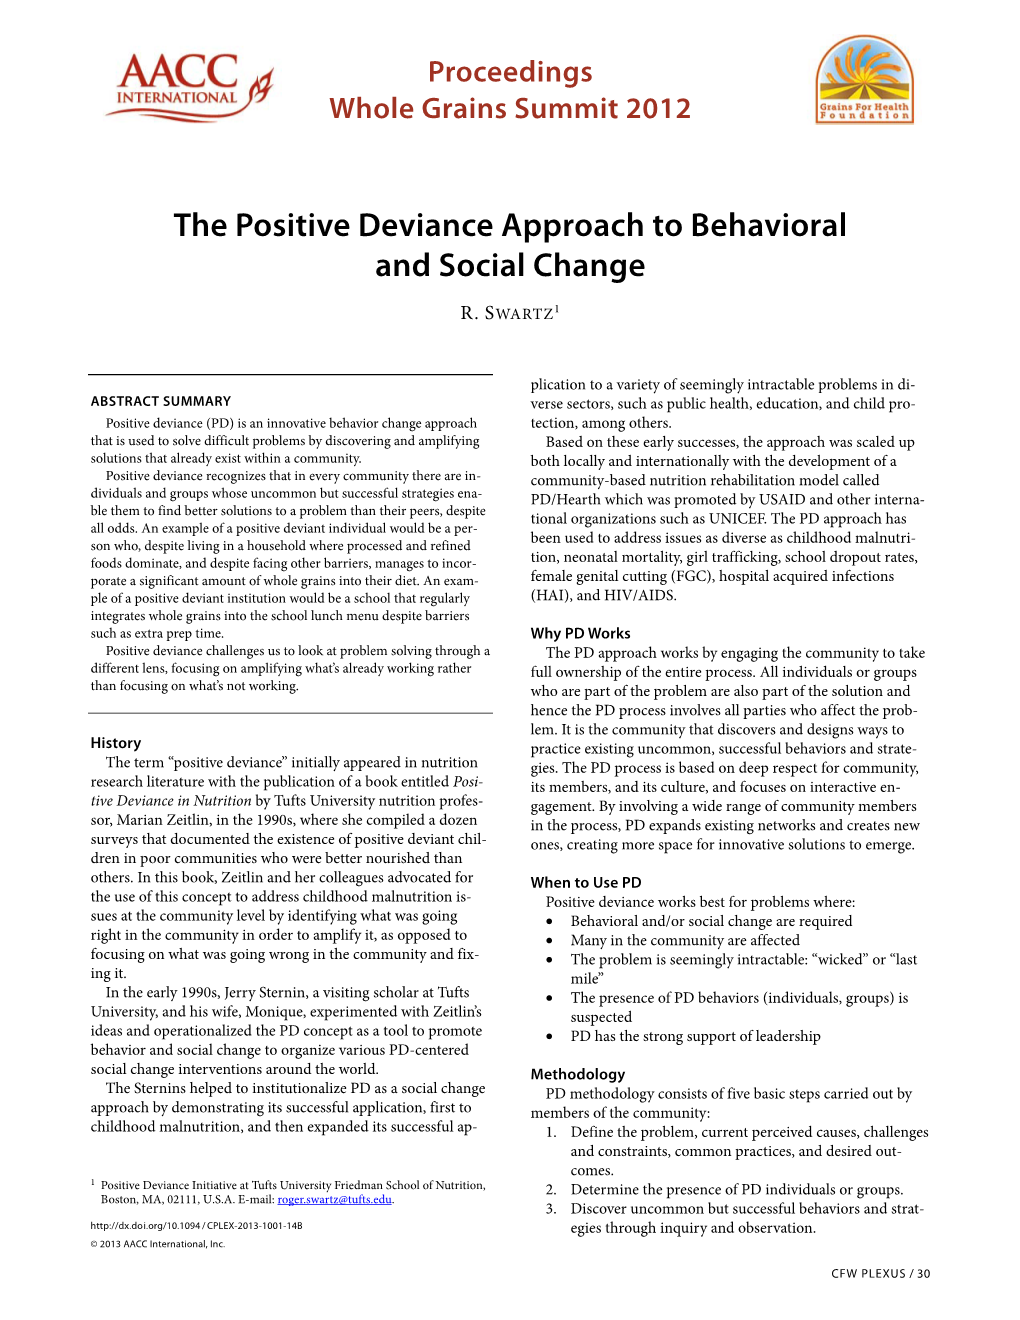 The Positive Deviance Approach to Behavioral and Social Change